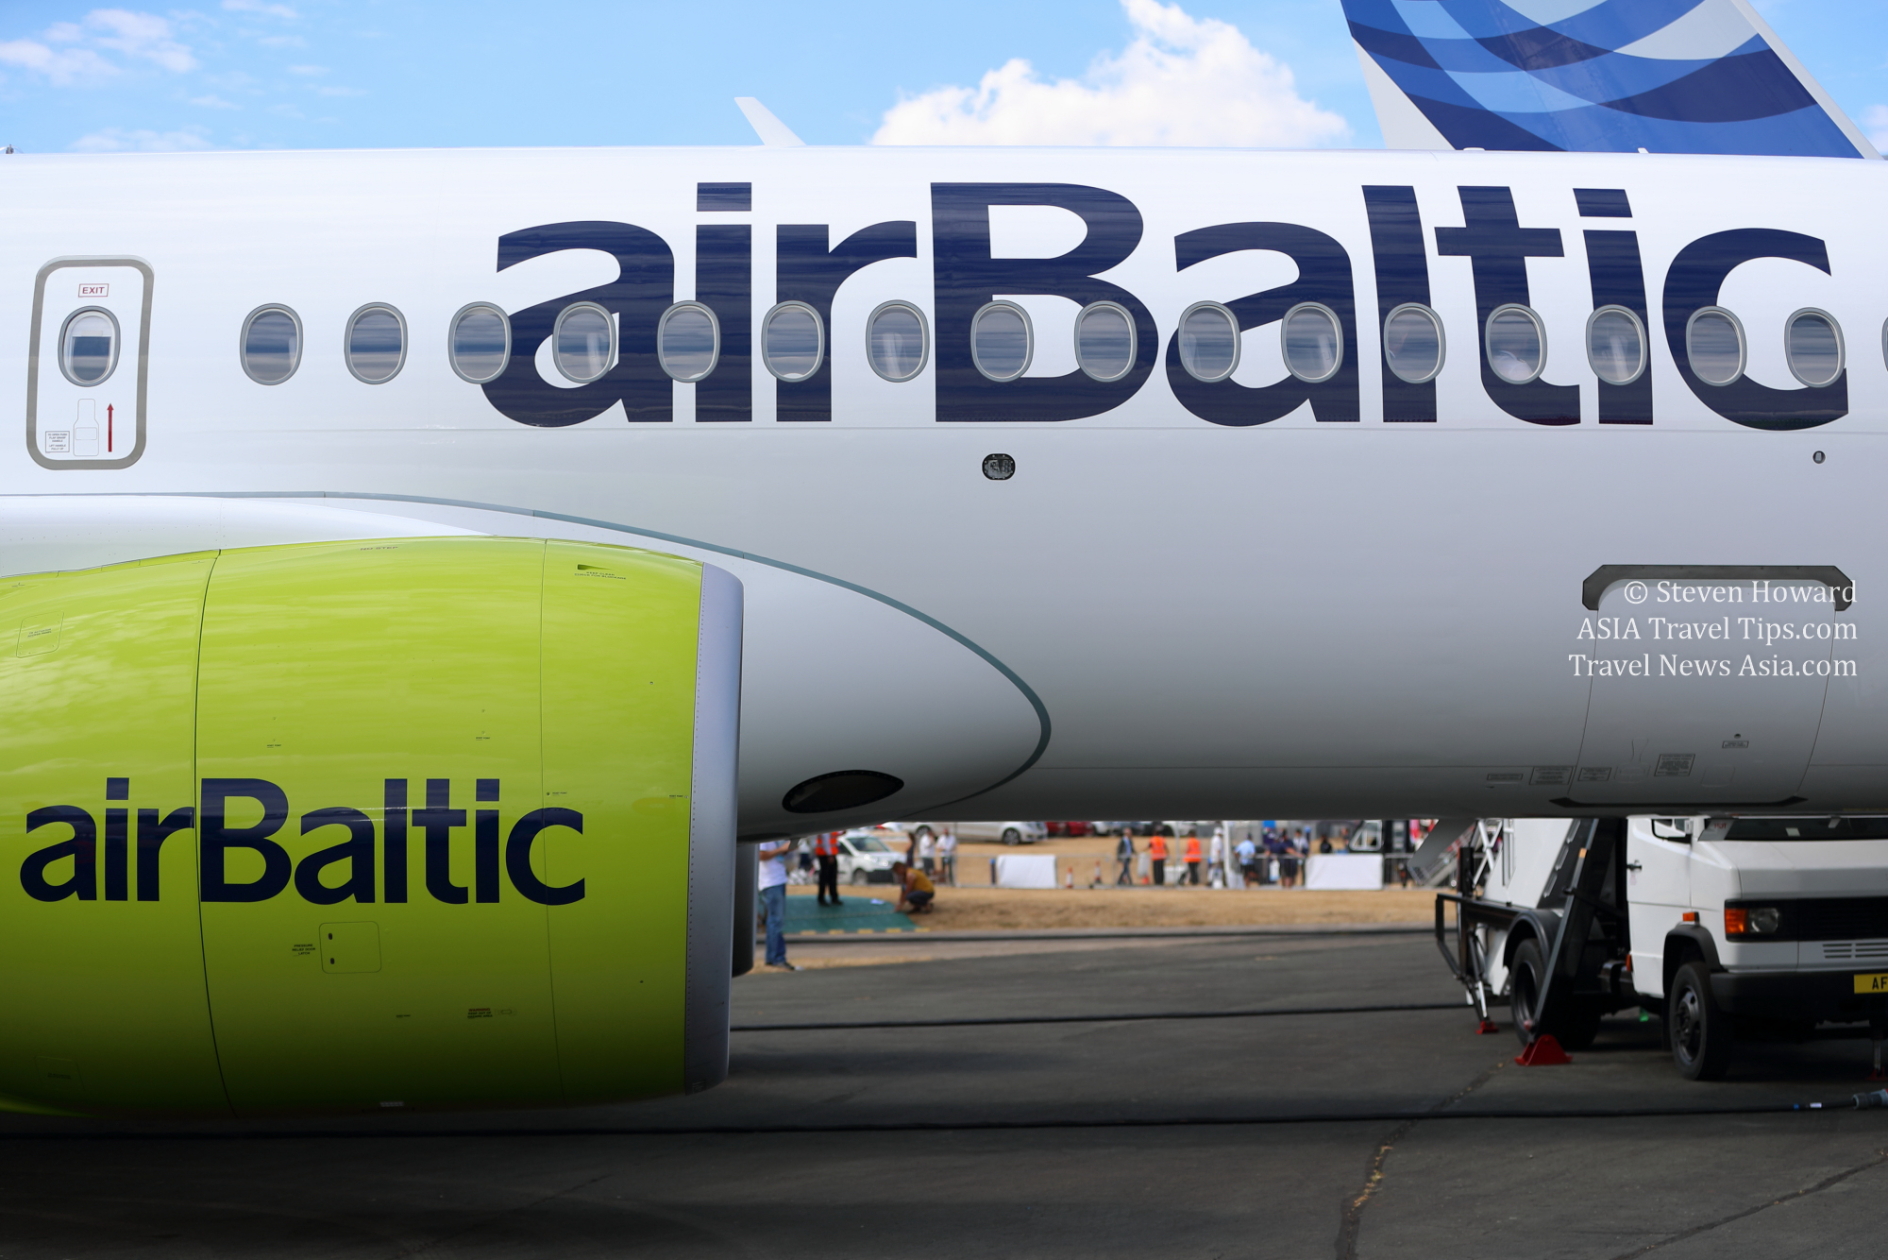 airBaltic's fleet now consists of 39 A220-300s. Picture by Steven Howard of TravelNewsAsia.com Click to enlarge.